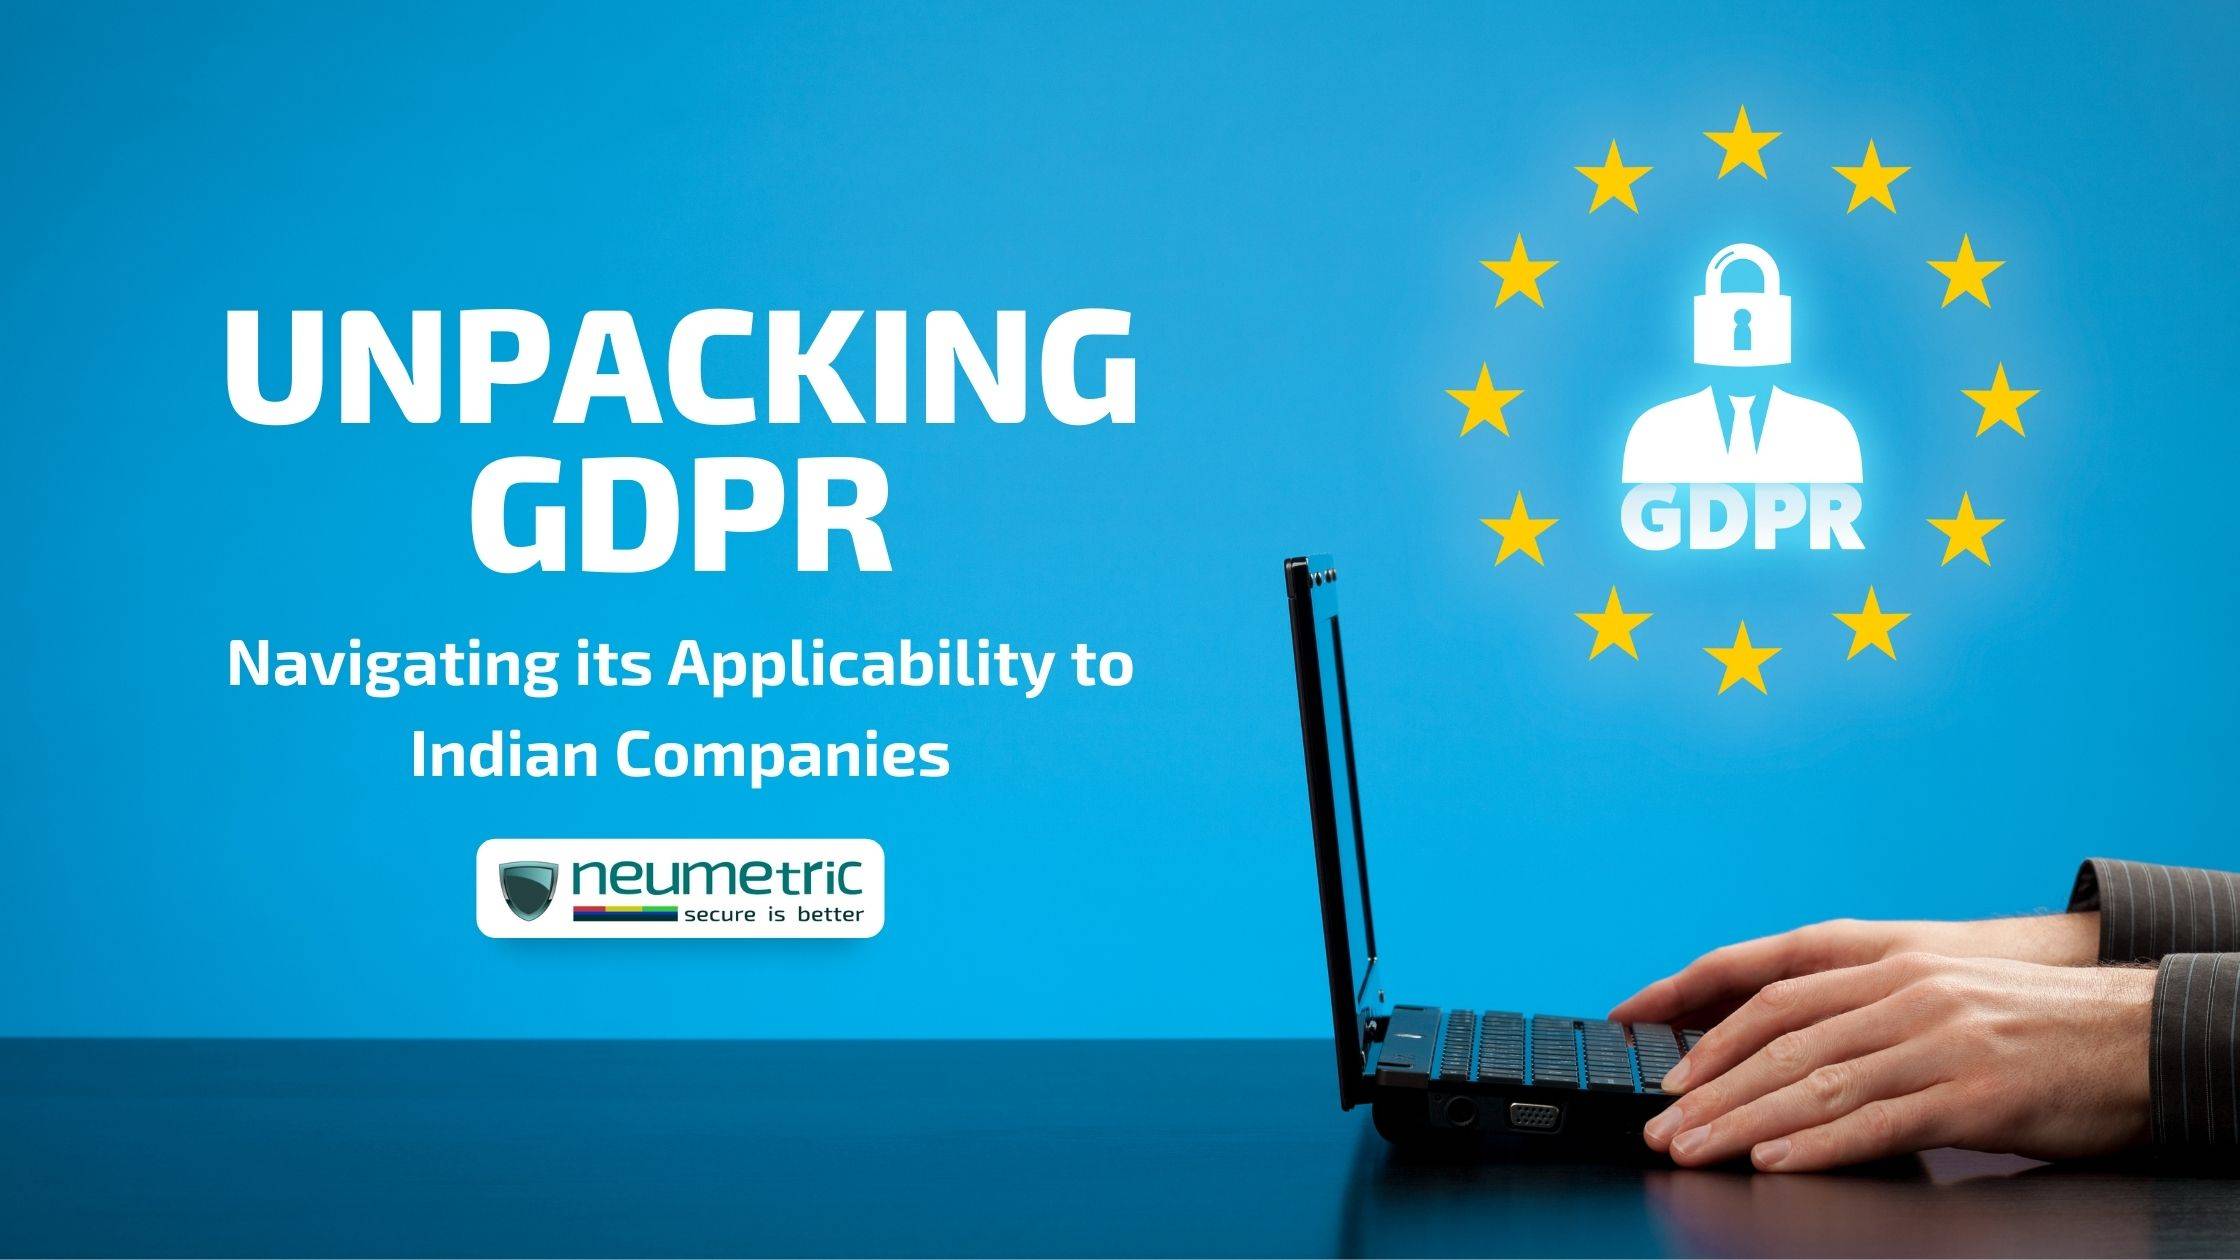 Unpacking GDPR: Navigating its Applicability to Indian Companies